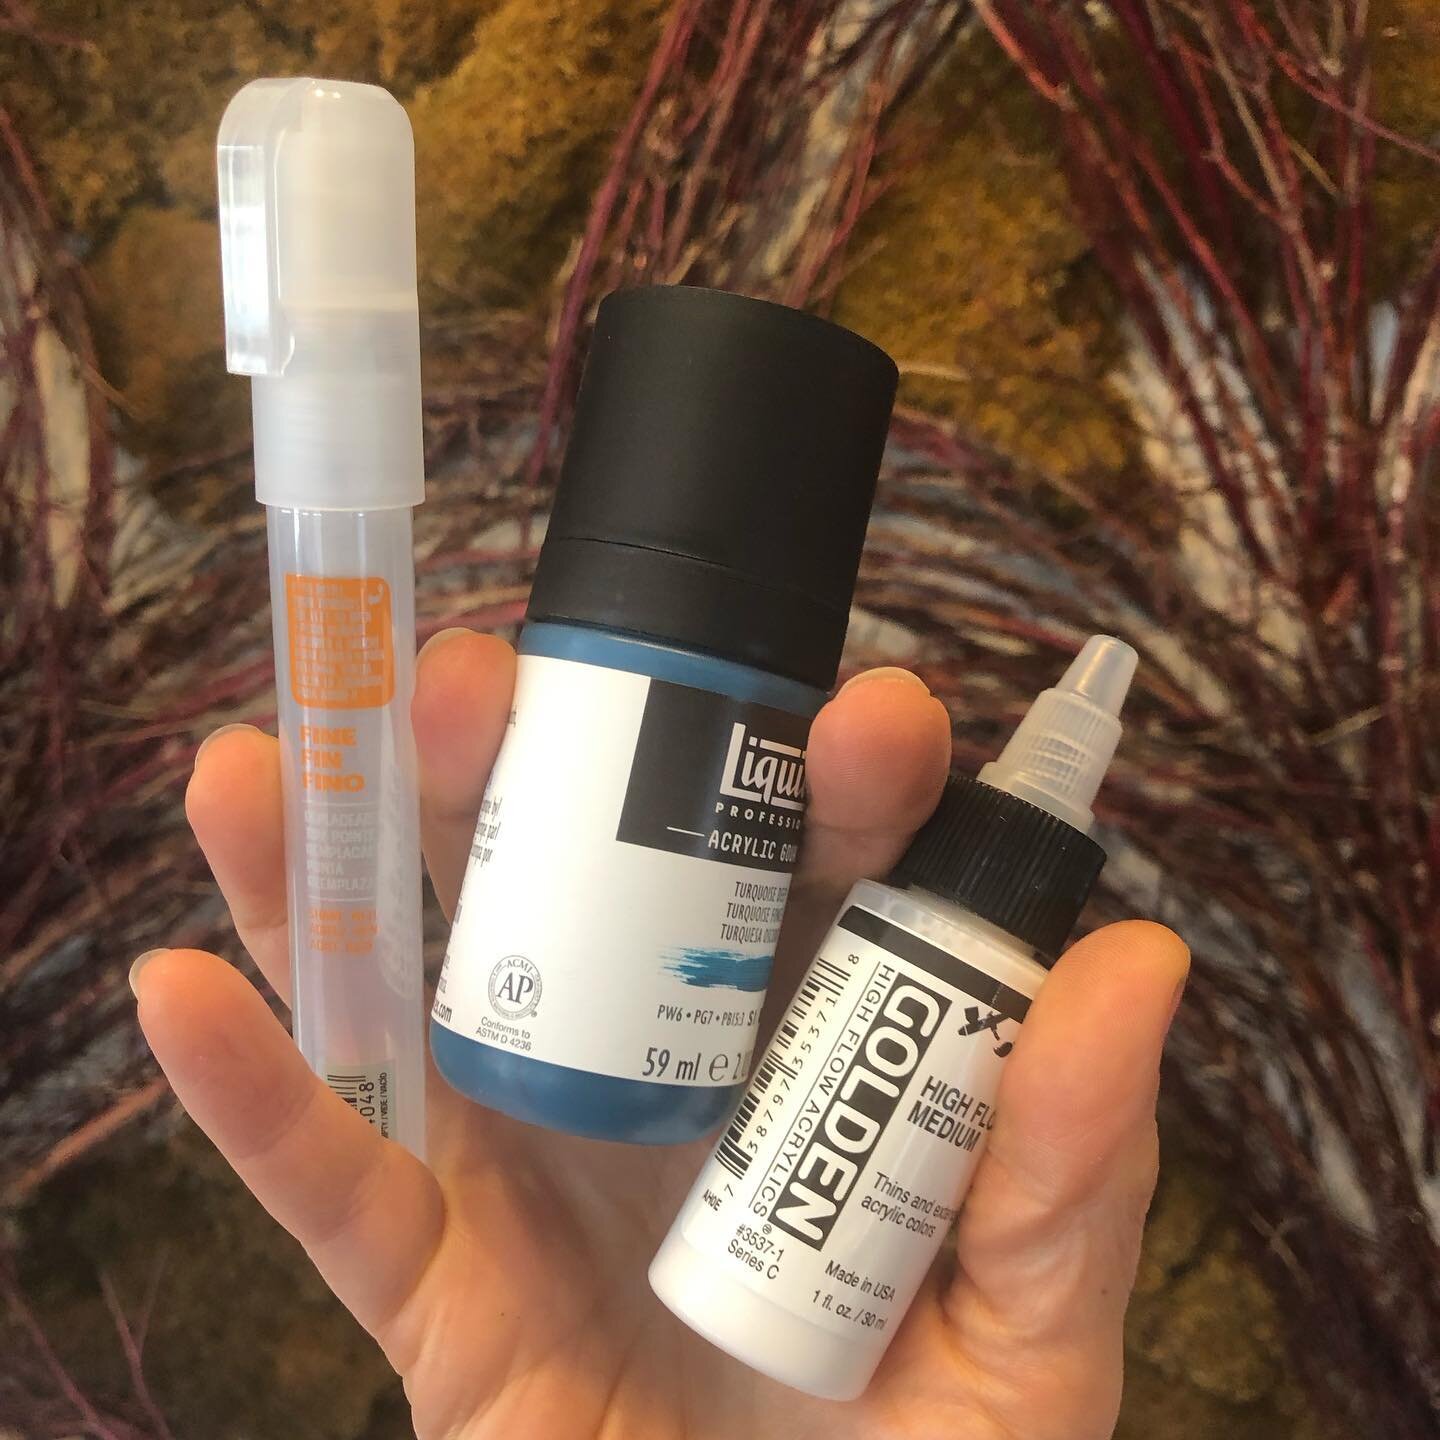 There are a few spots left for tonight&rsquo;s paint markers workshop! Learn how to use refillable paint markers, how to modify replaceable tips to make texture, and why they are one of my favorite things to work with as an art therapist. See today&r